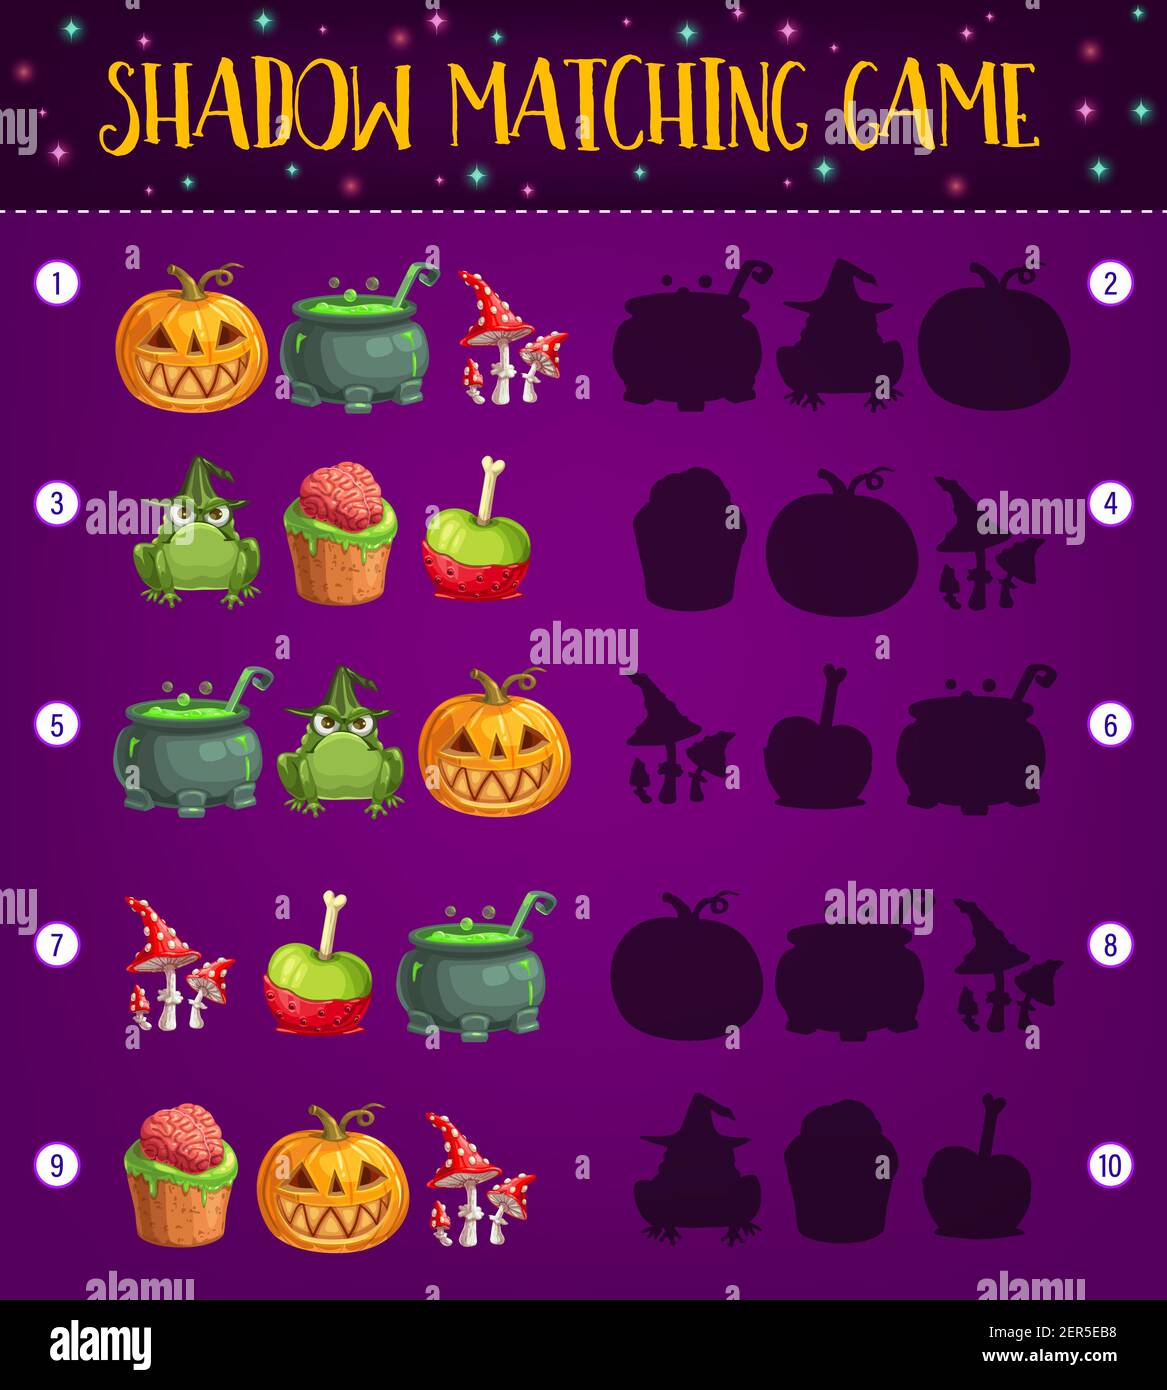 Premium Vector  Educational matching game for kids with spooky halloween  characters